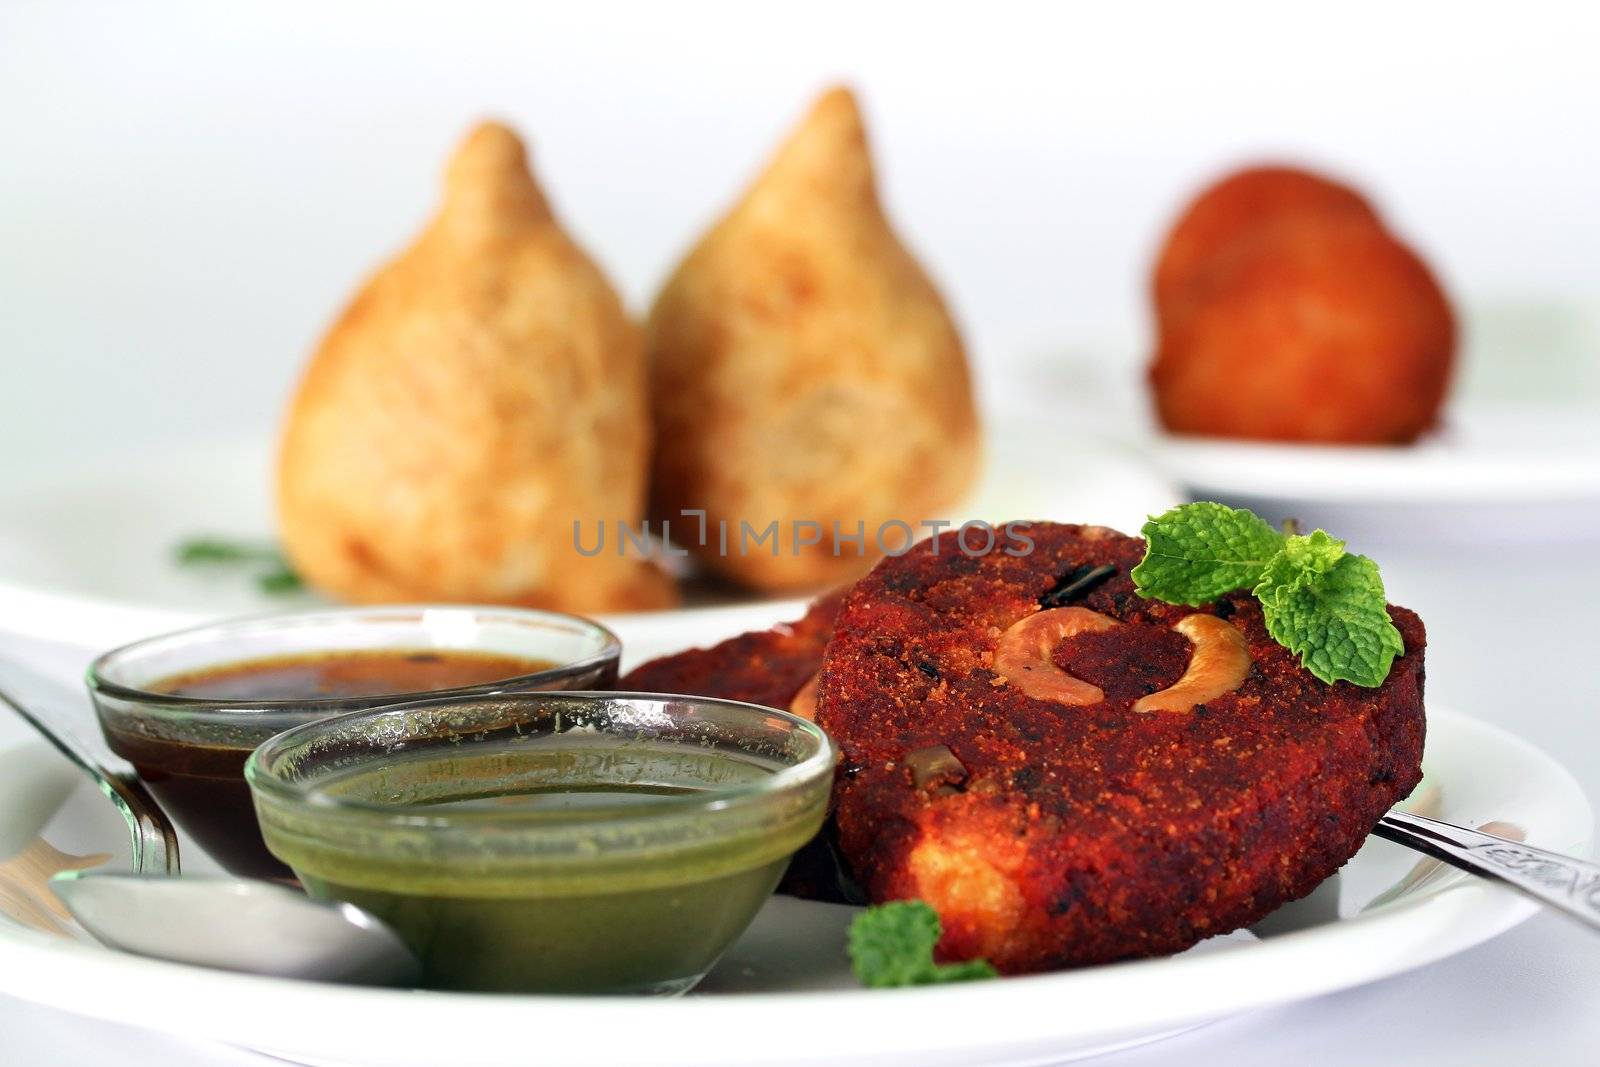 Indian deep fried snack cutlet made of potatoes by mnsanthoshkumar